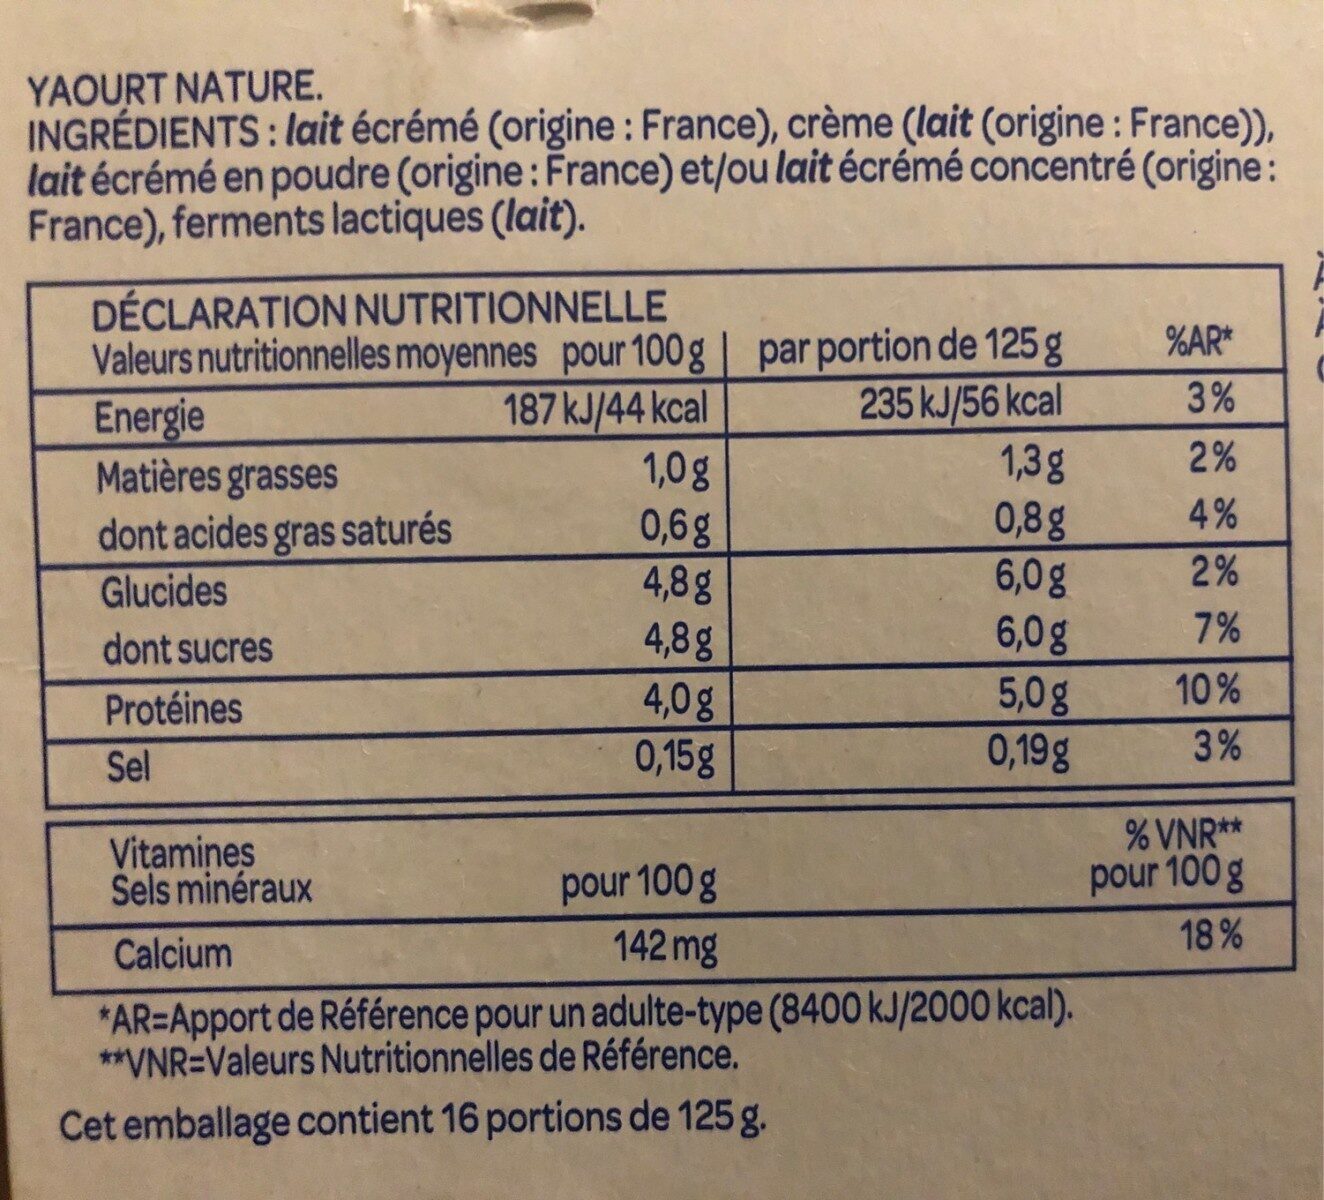 YAOURT Nature - Nutrition facts - fr